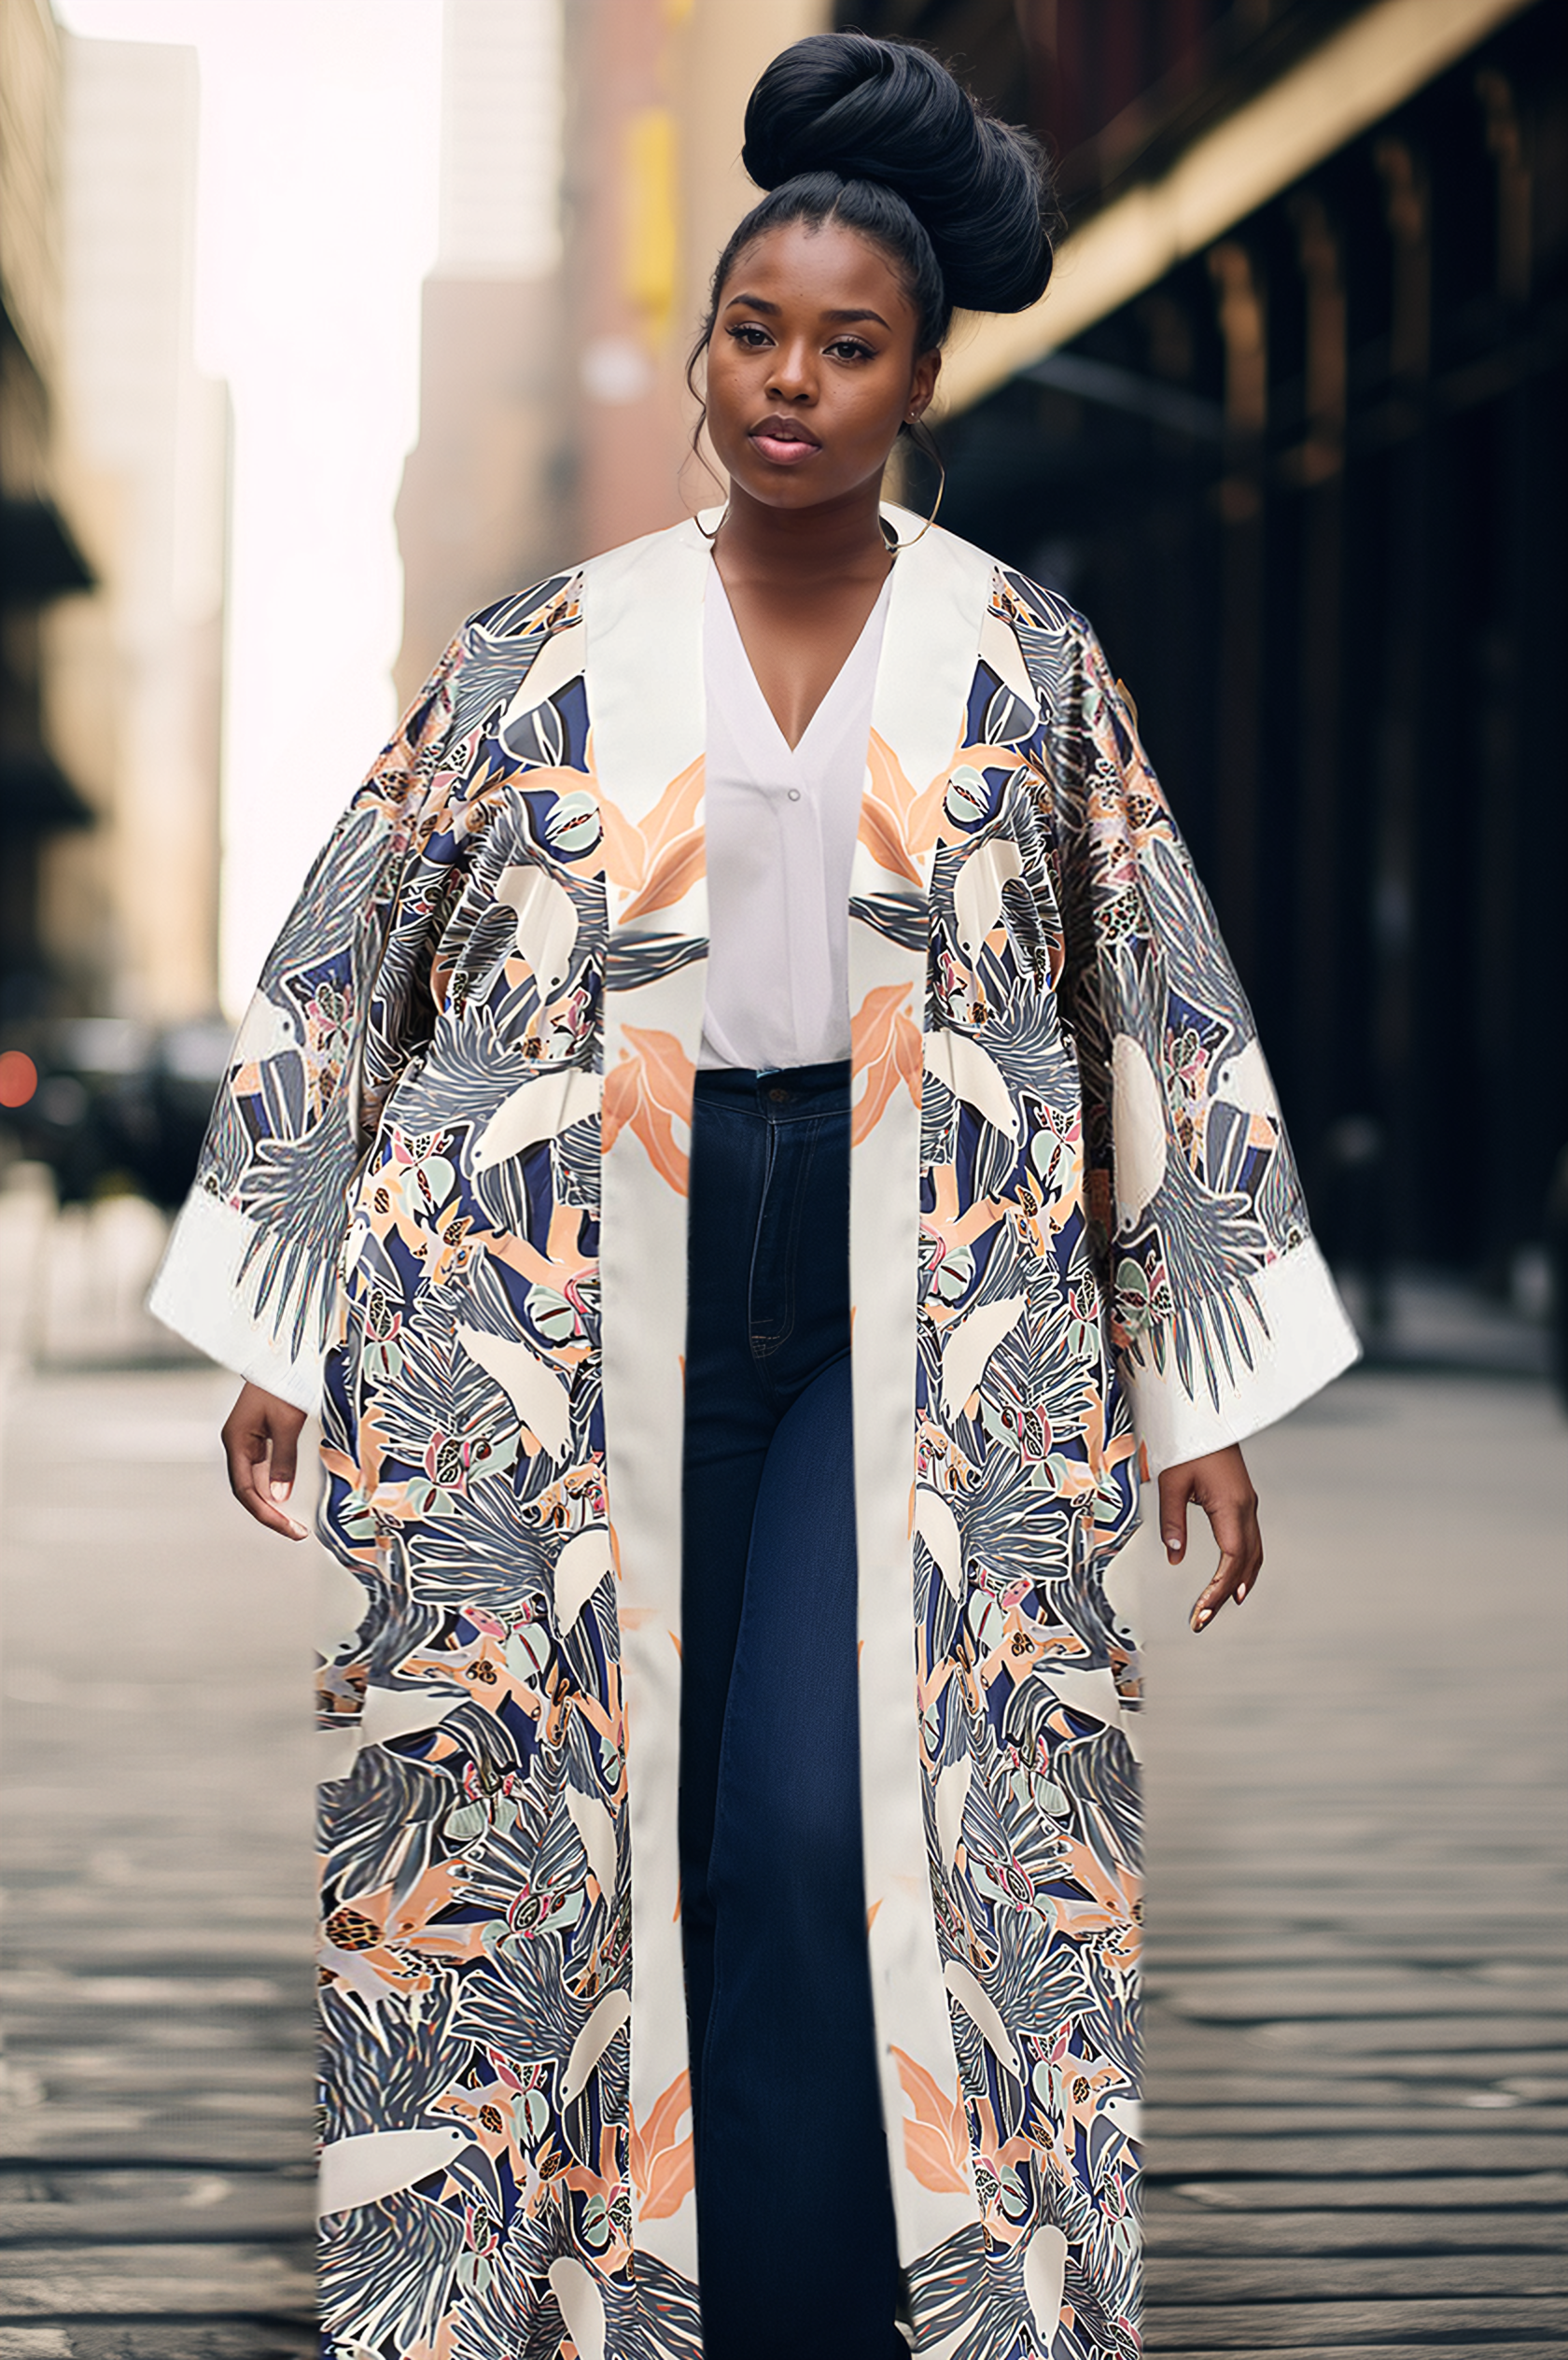 Woman wearing kimono robe in navy toucans robe open with hands at her side